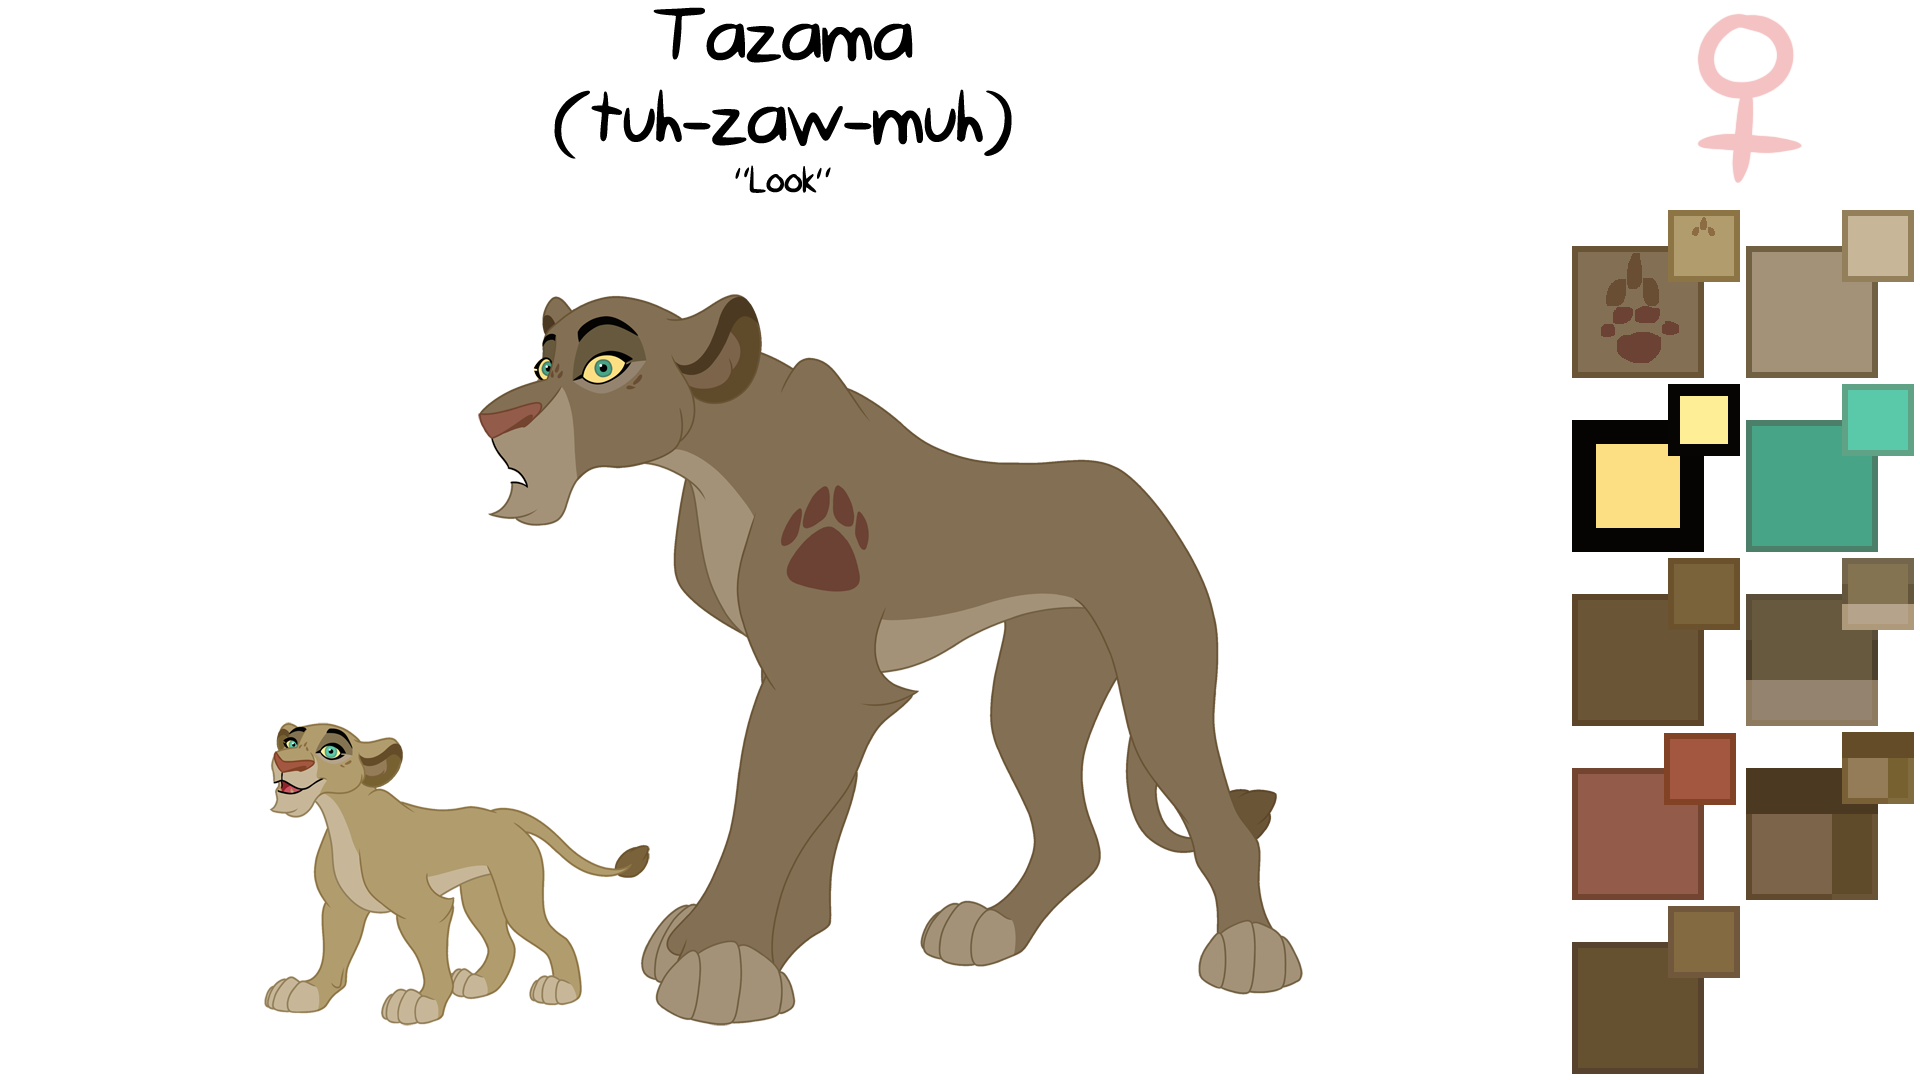 If Aslan Had A Daughter by QuantumInnovator on DeviantArt